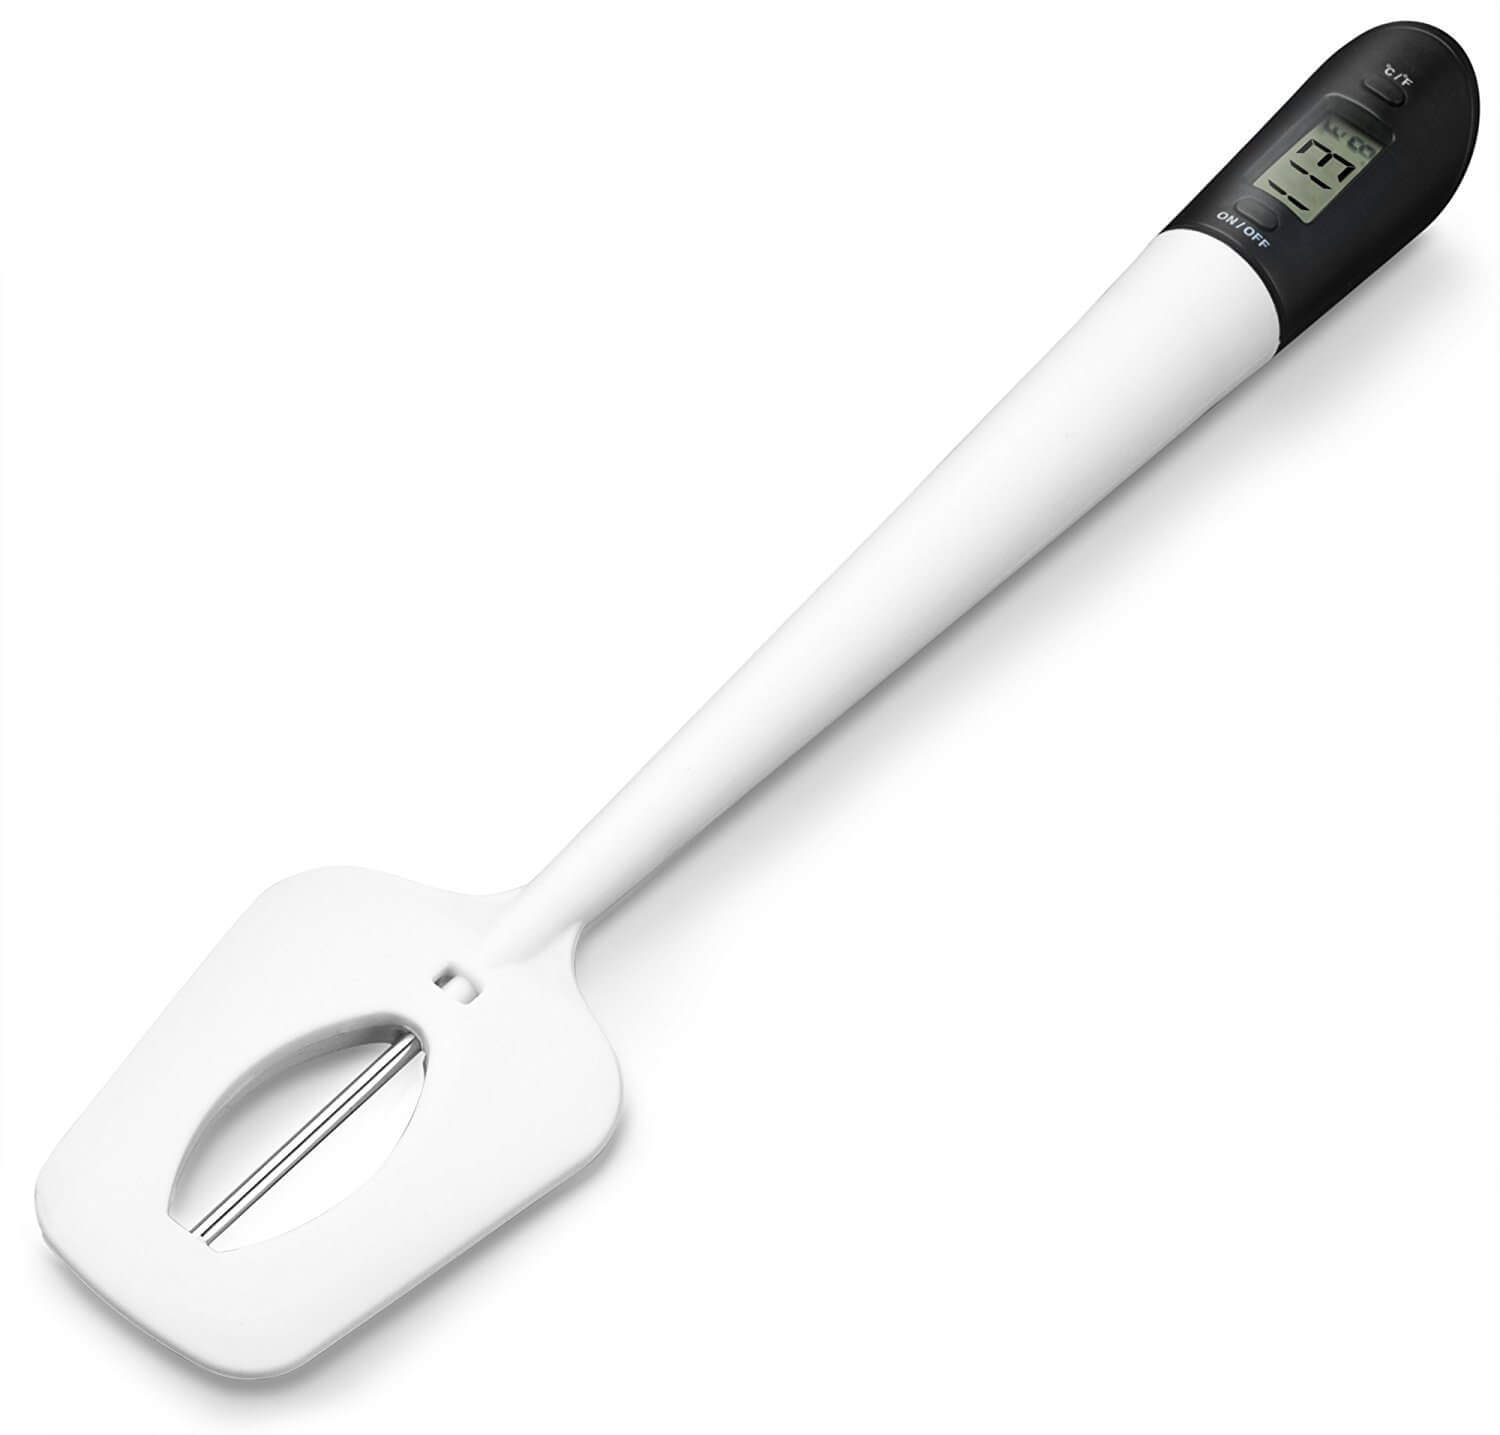 Gourmet GTH9185 Digital Spatula Thermometer Cooking & Candy Temperature